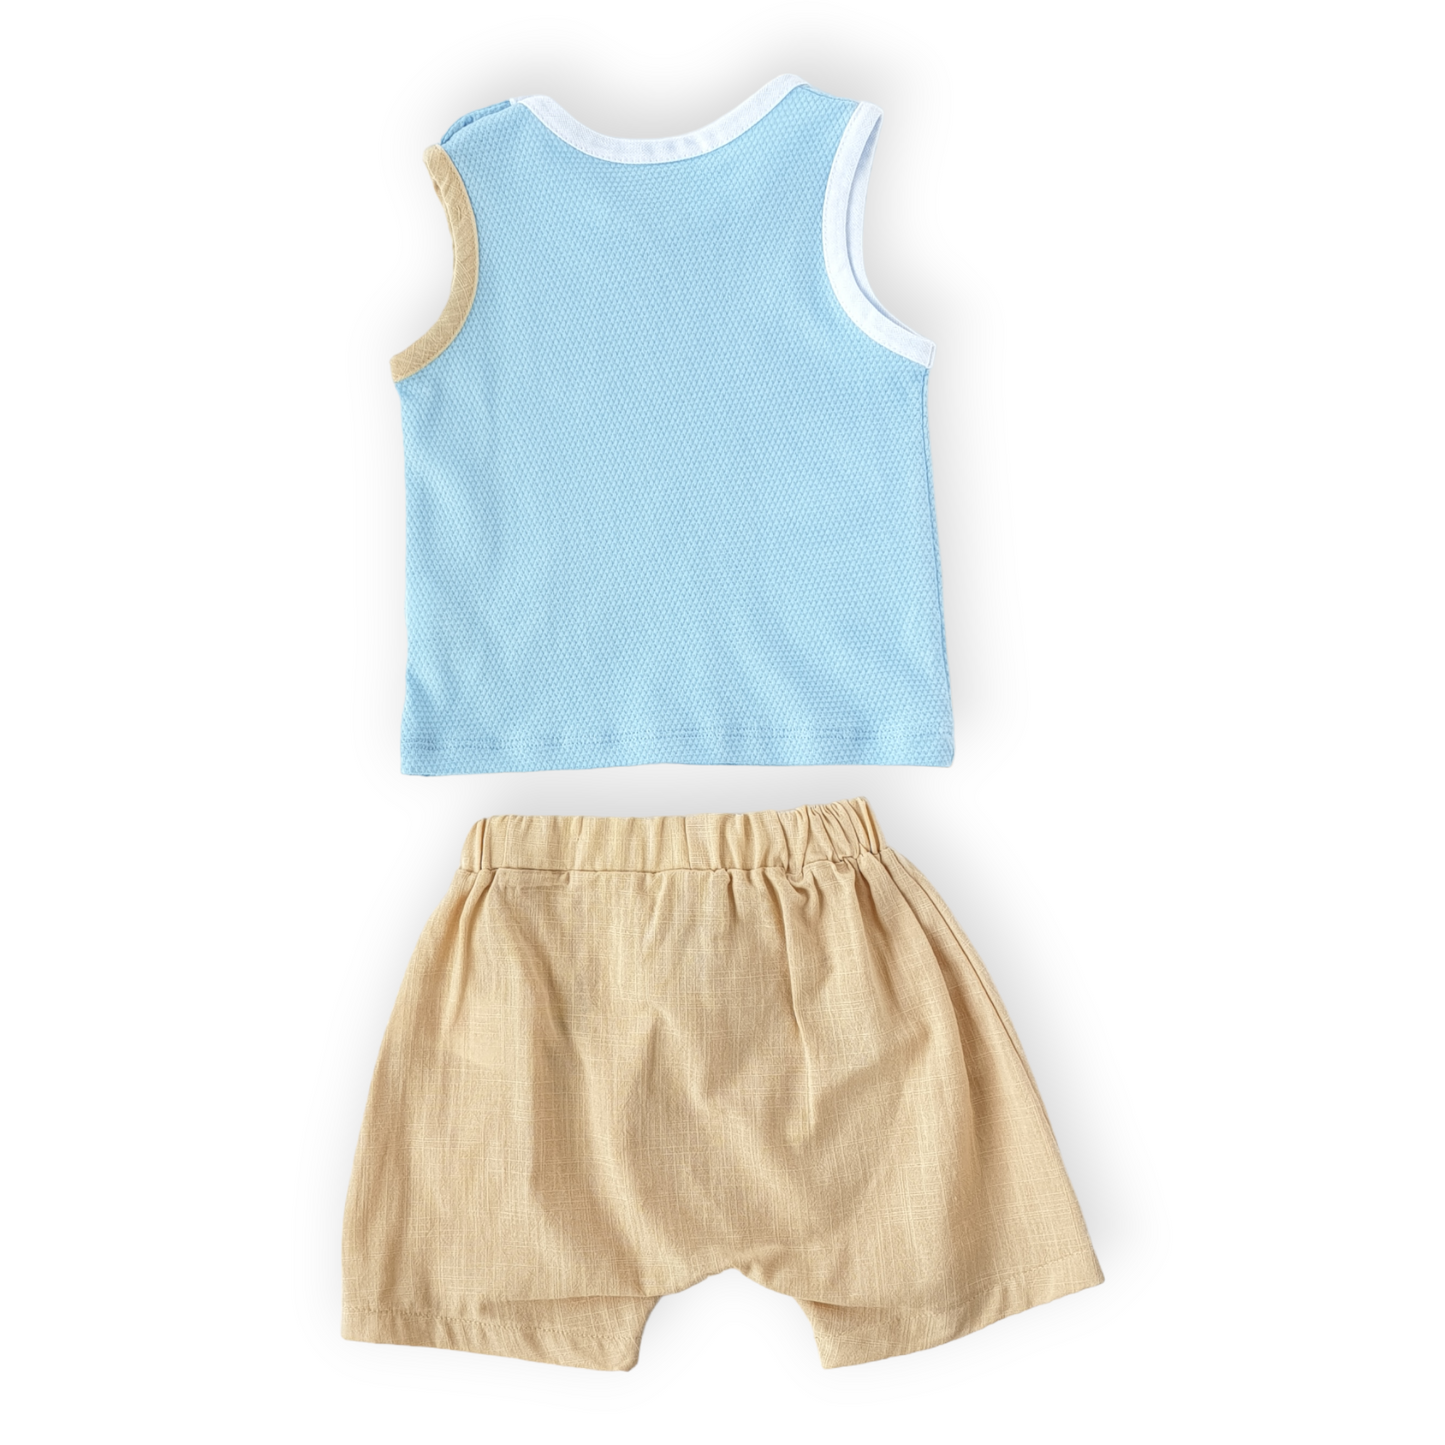 Marching Band Set Blue and Beige-Band, Beige, Blue, Boy, Catboy, Catgirl, Catset2pcs, Girl, Marching, Set, Shorts, Sleeveless, SS23, Top-Tongs-[Too Twee]-[Tootwee]-[baby]-[newborn]-[clothes]-[essentials]-[toys]-[Lebanon]